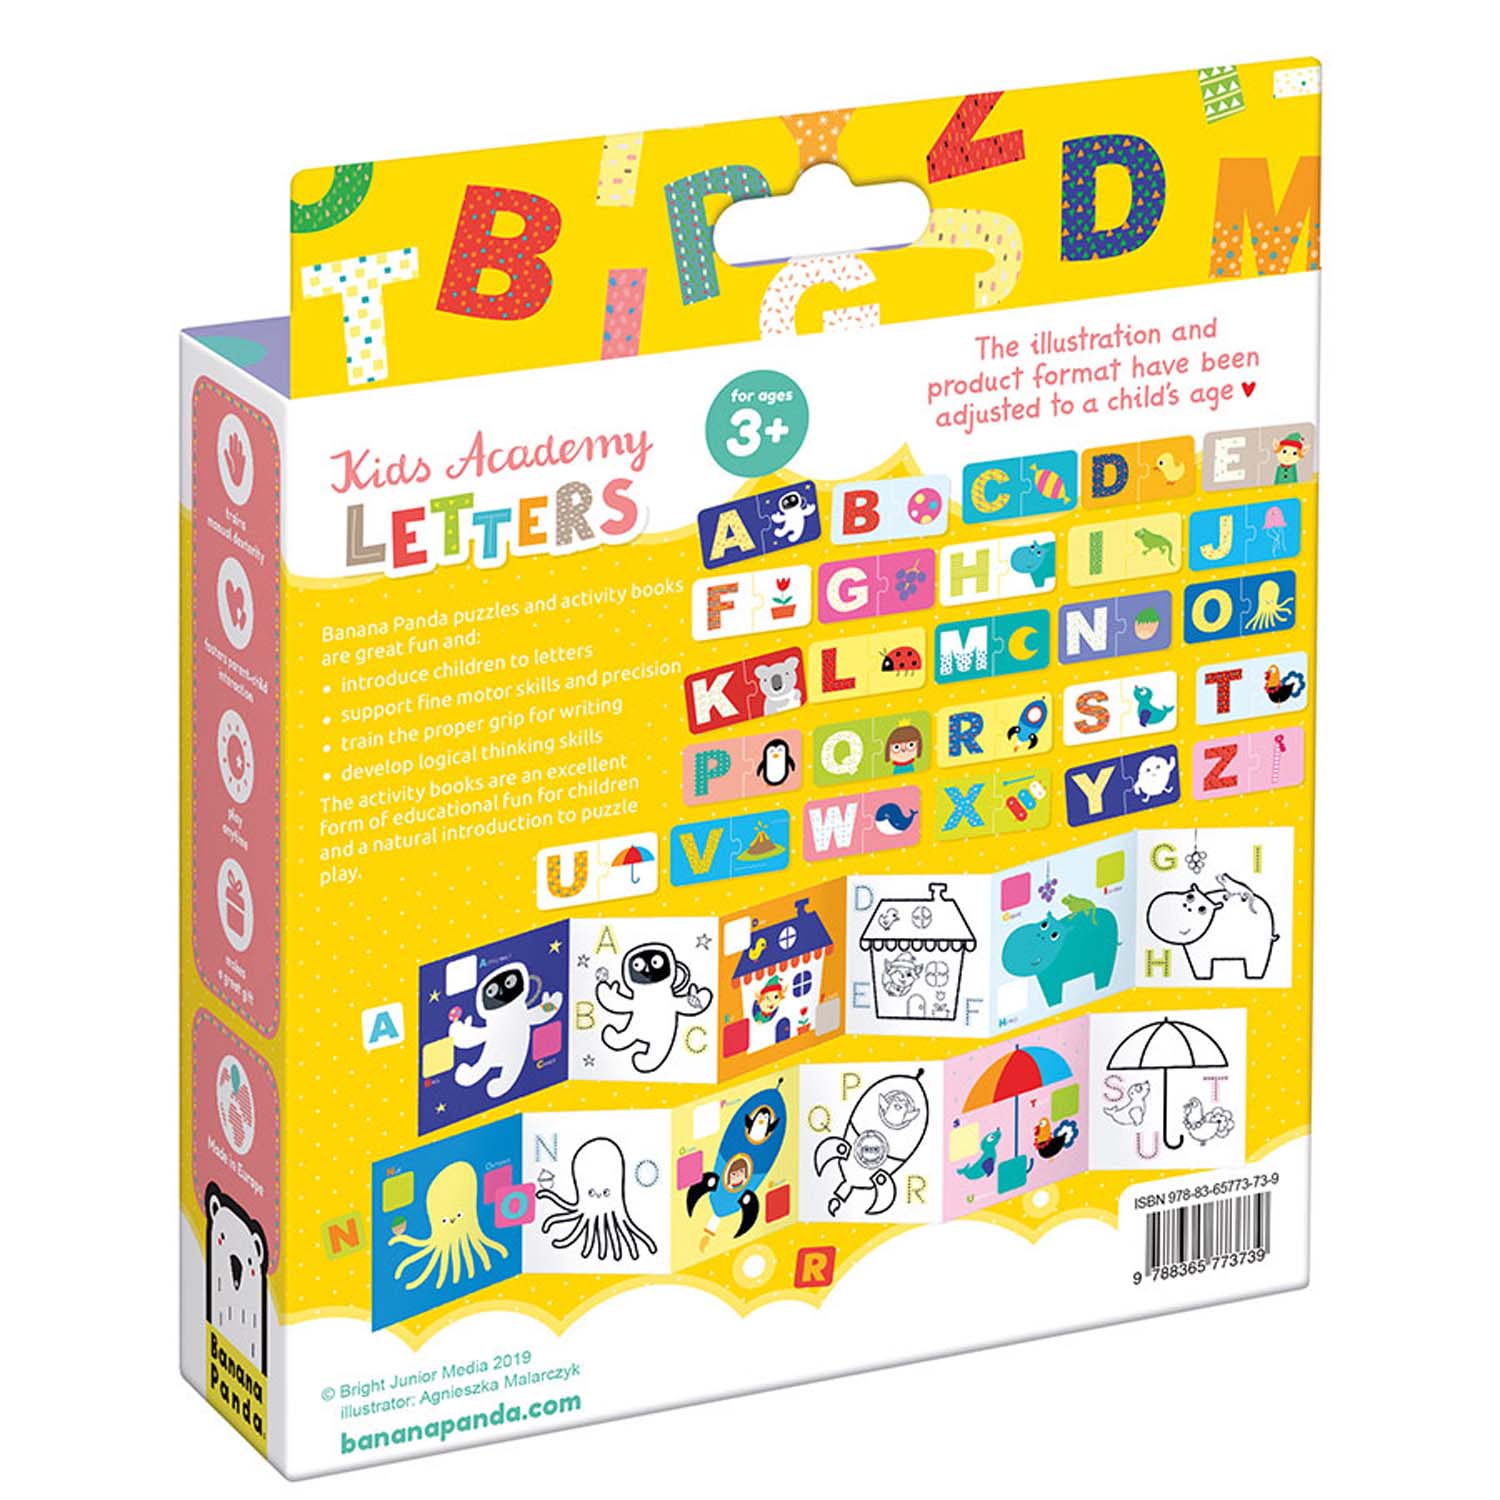 Best kids' activity books that are fun and educational